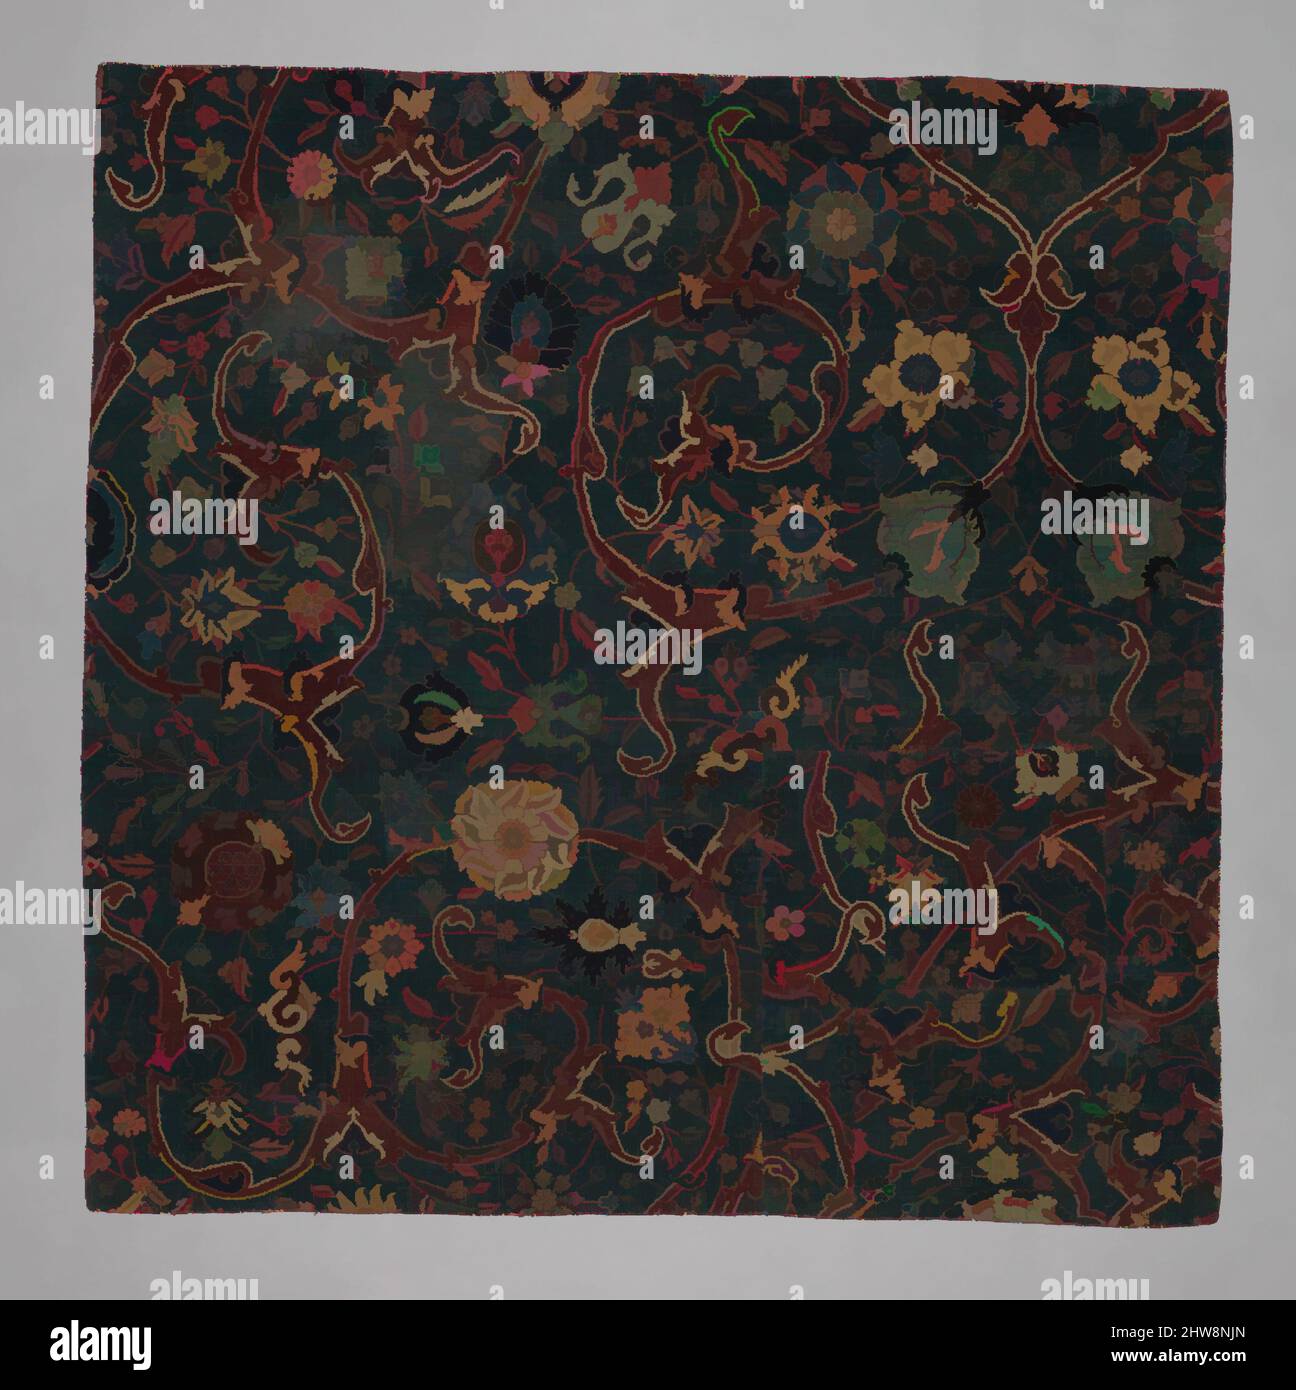 Art inspired by Blue-ground Carpet Fragment with Scrolling Floral Vines, 17th century, Made in Iran, probably Kirman, Cotton (warp), wool (weft and pile); asymmetrically knotted pile, Rug: H. 54 1/8 in. (137.5 cm), Textiles-Rugs, This fragment of a carpet bears a variety of flowers on, Classic works modernized by Artotop with a splash of modernity. Shapes, color and value, eye-catching visual impact on art. Emotions through freedom of artworks in a contemporary way. A timeless message pursuing a wildly creative new direction. Artists turning to the digital medium and creating the Artotop NFT Stock Photo